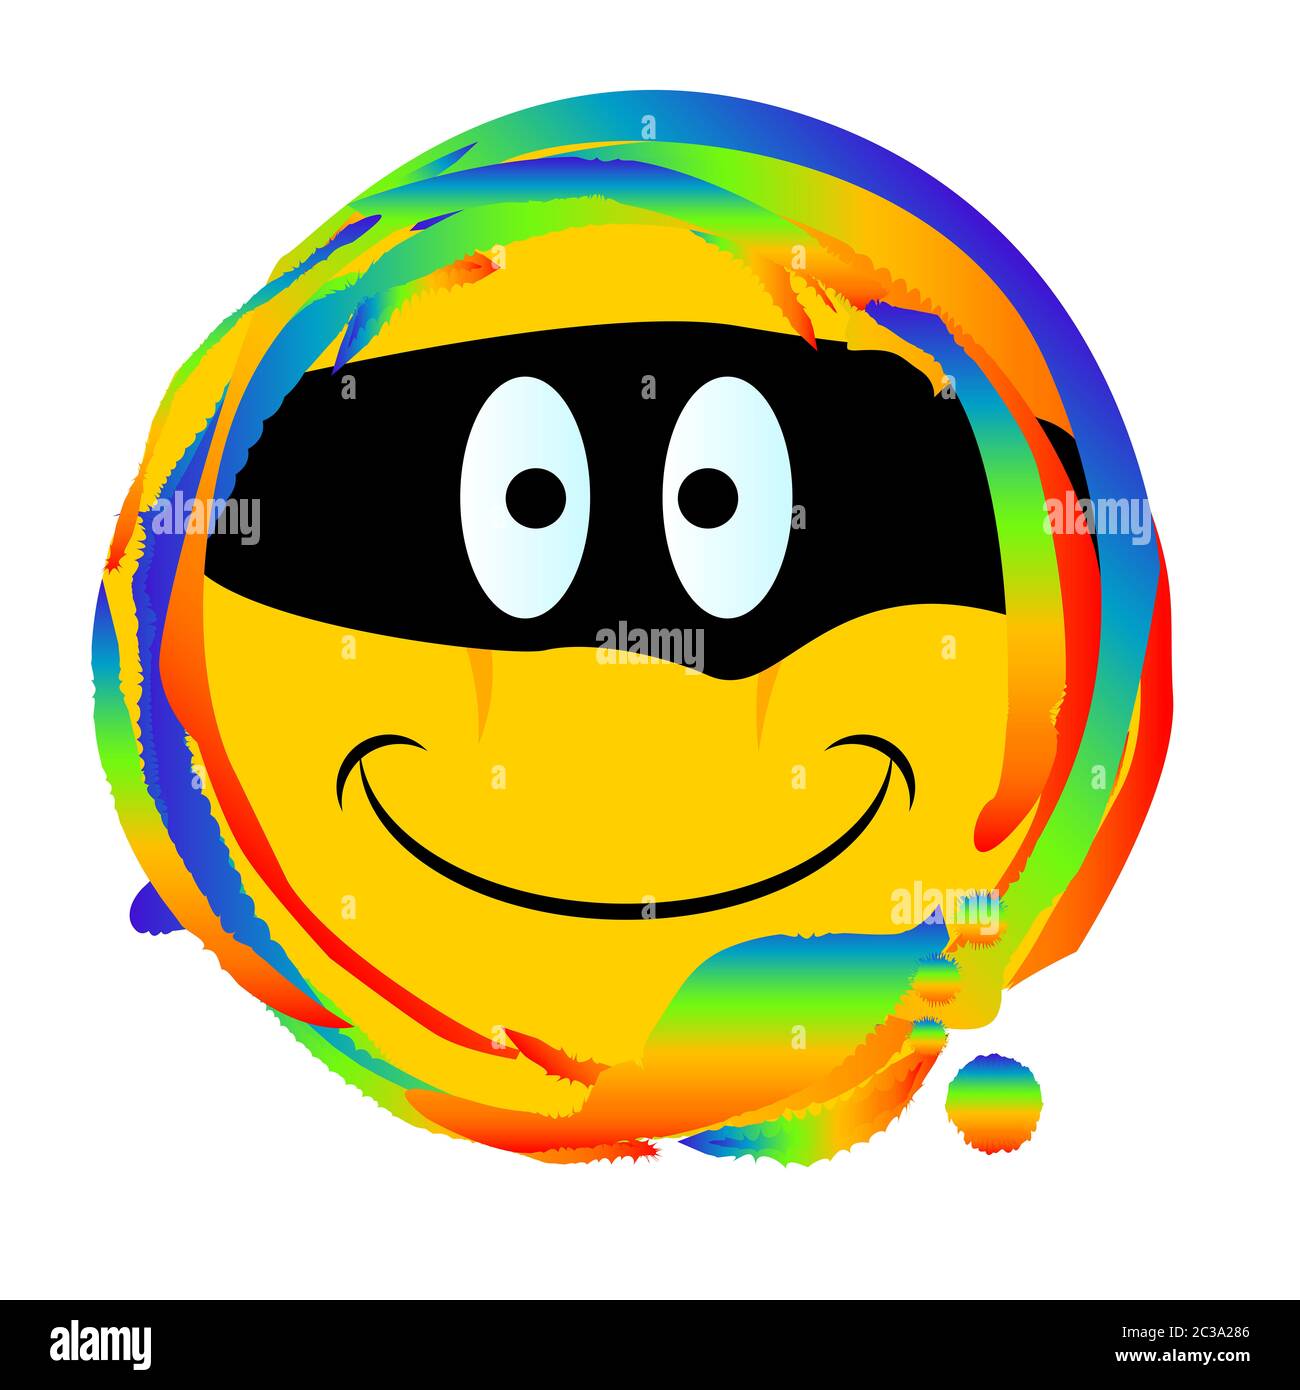 Emoji smiley face with a bandit mask web button set on a rainbow Stock Photo